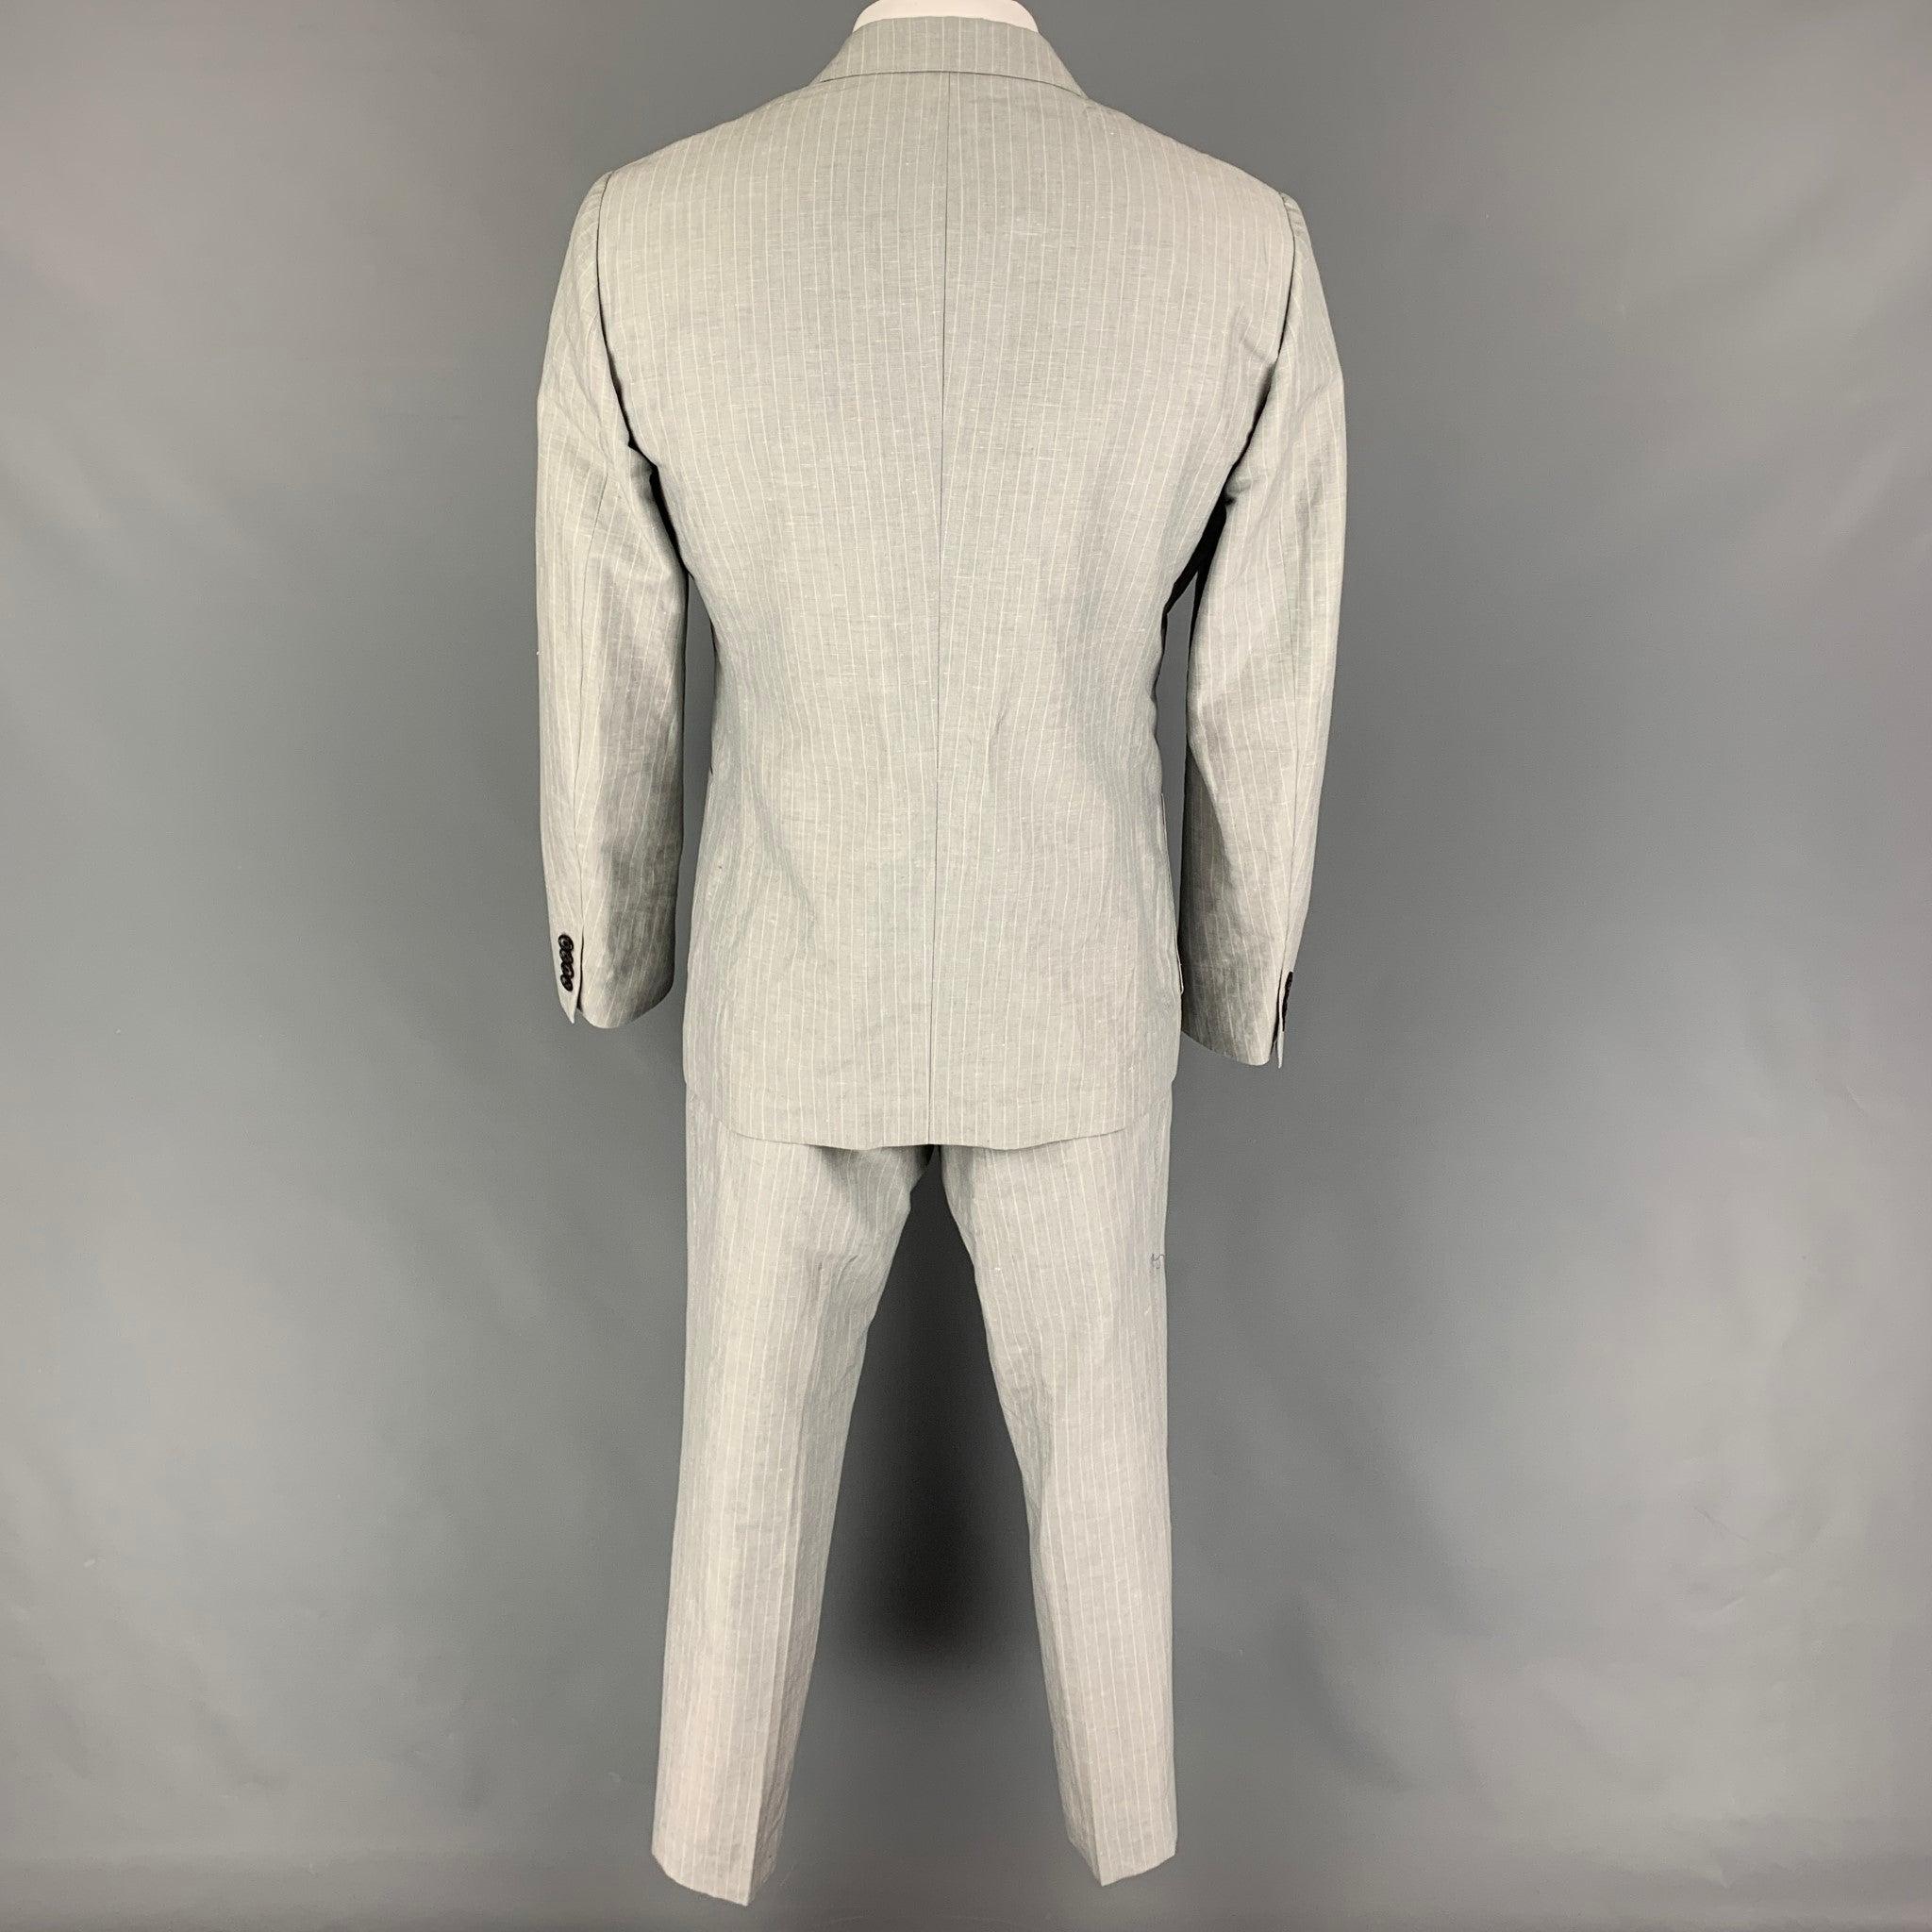 DOLCE & GABBANA Size 46 Light Gray Stripe Linen Cotton Notch Lapel Suit In Good Condition For Sale In San Francisco, CA